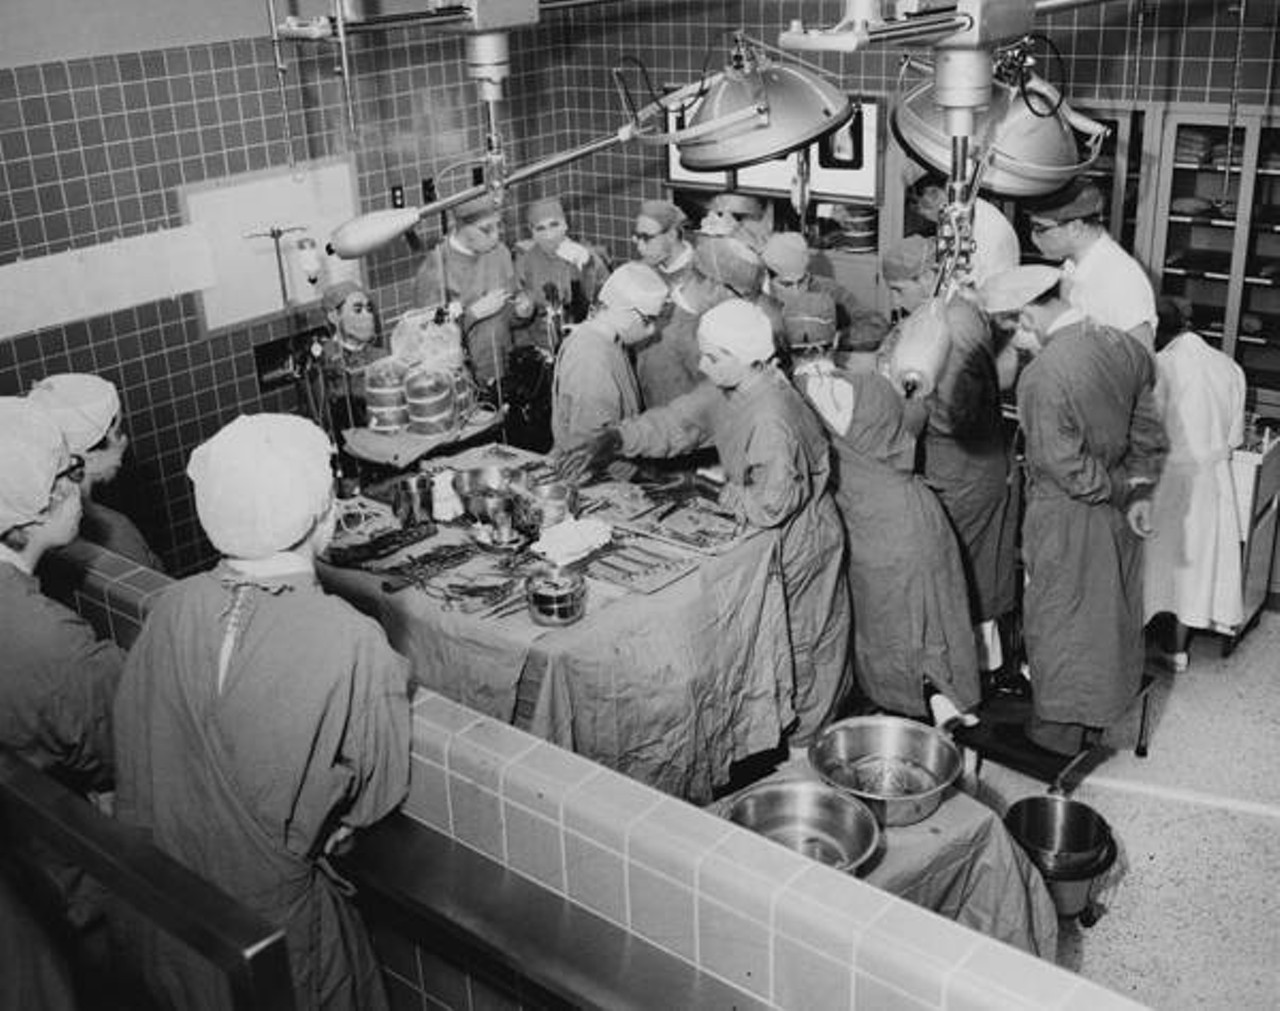  One of World's First Stopped Heart Surgeries at the Cleveland Clinic, 1956 